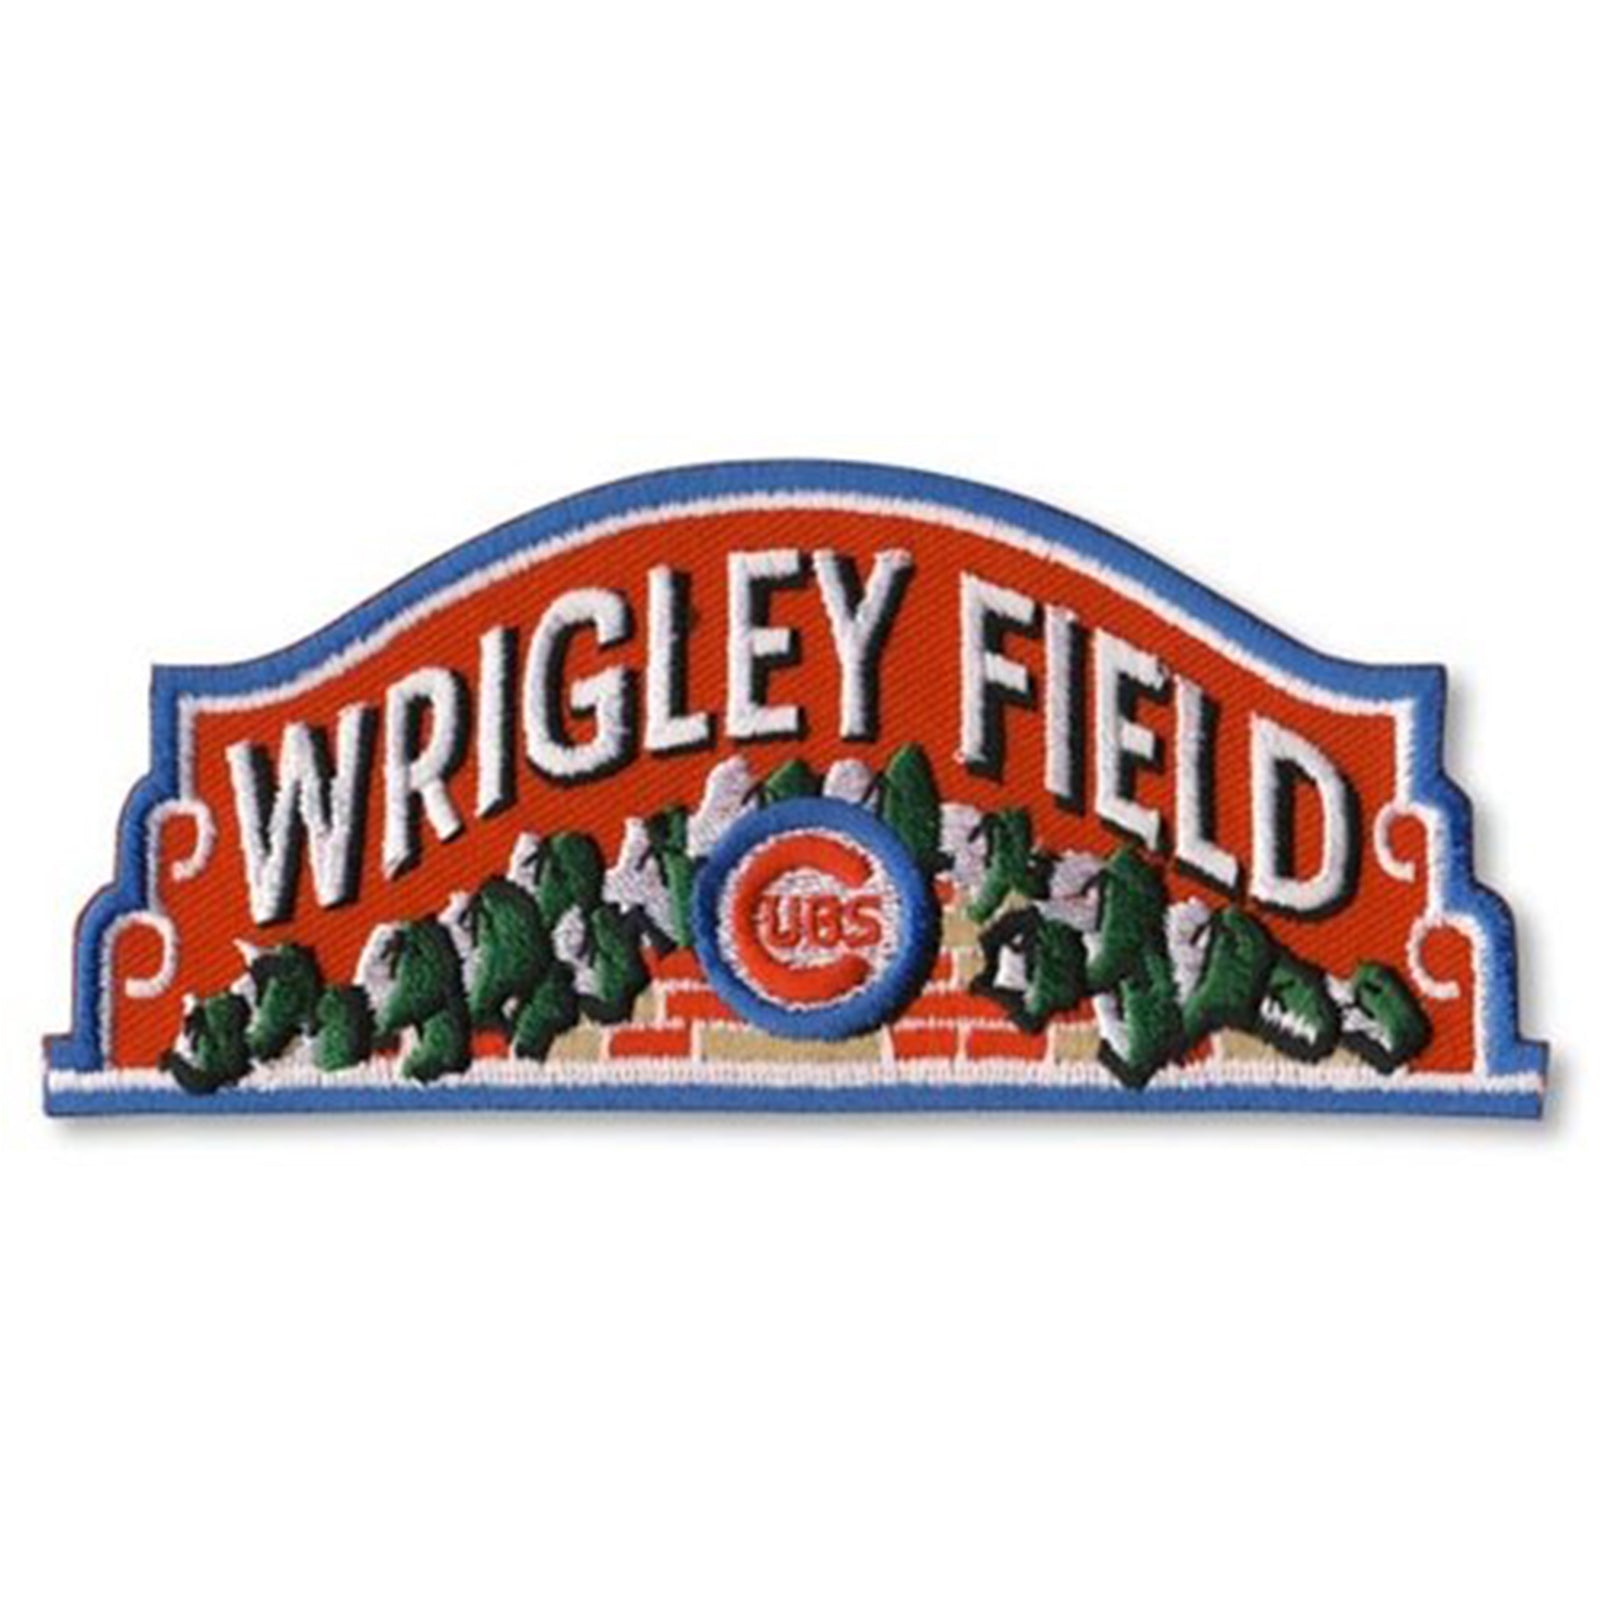 Chicago Cubs Wrigley Field Logo Patch 